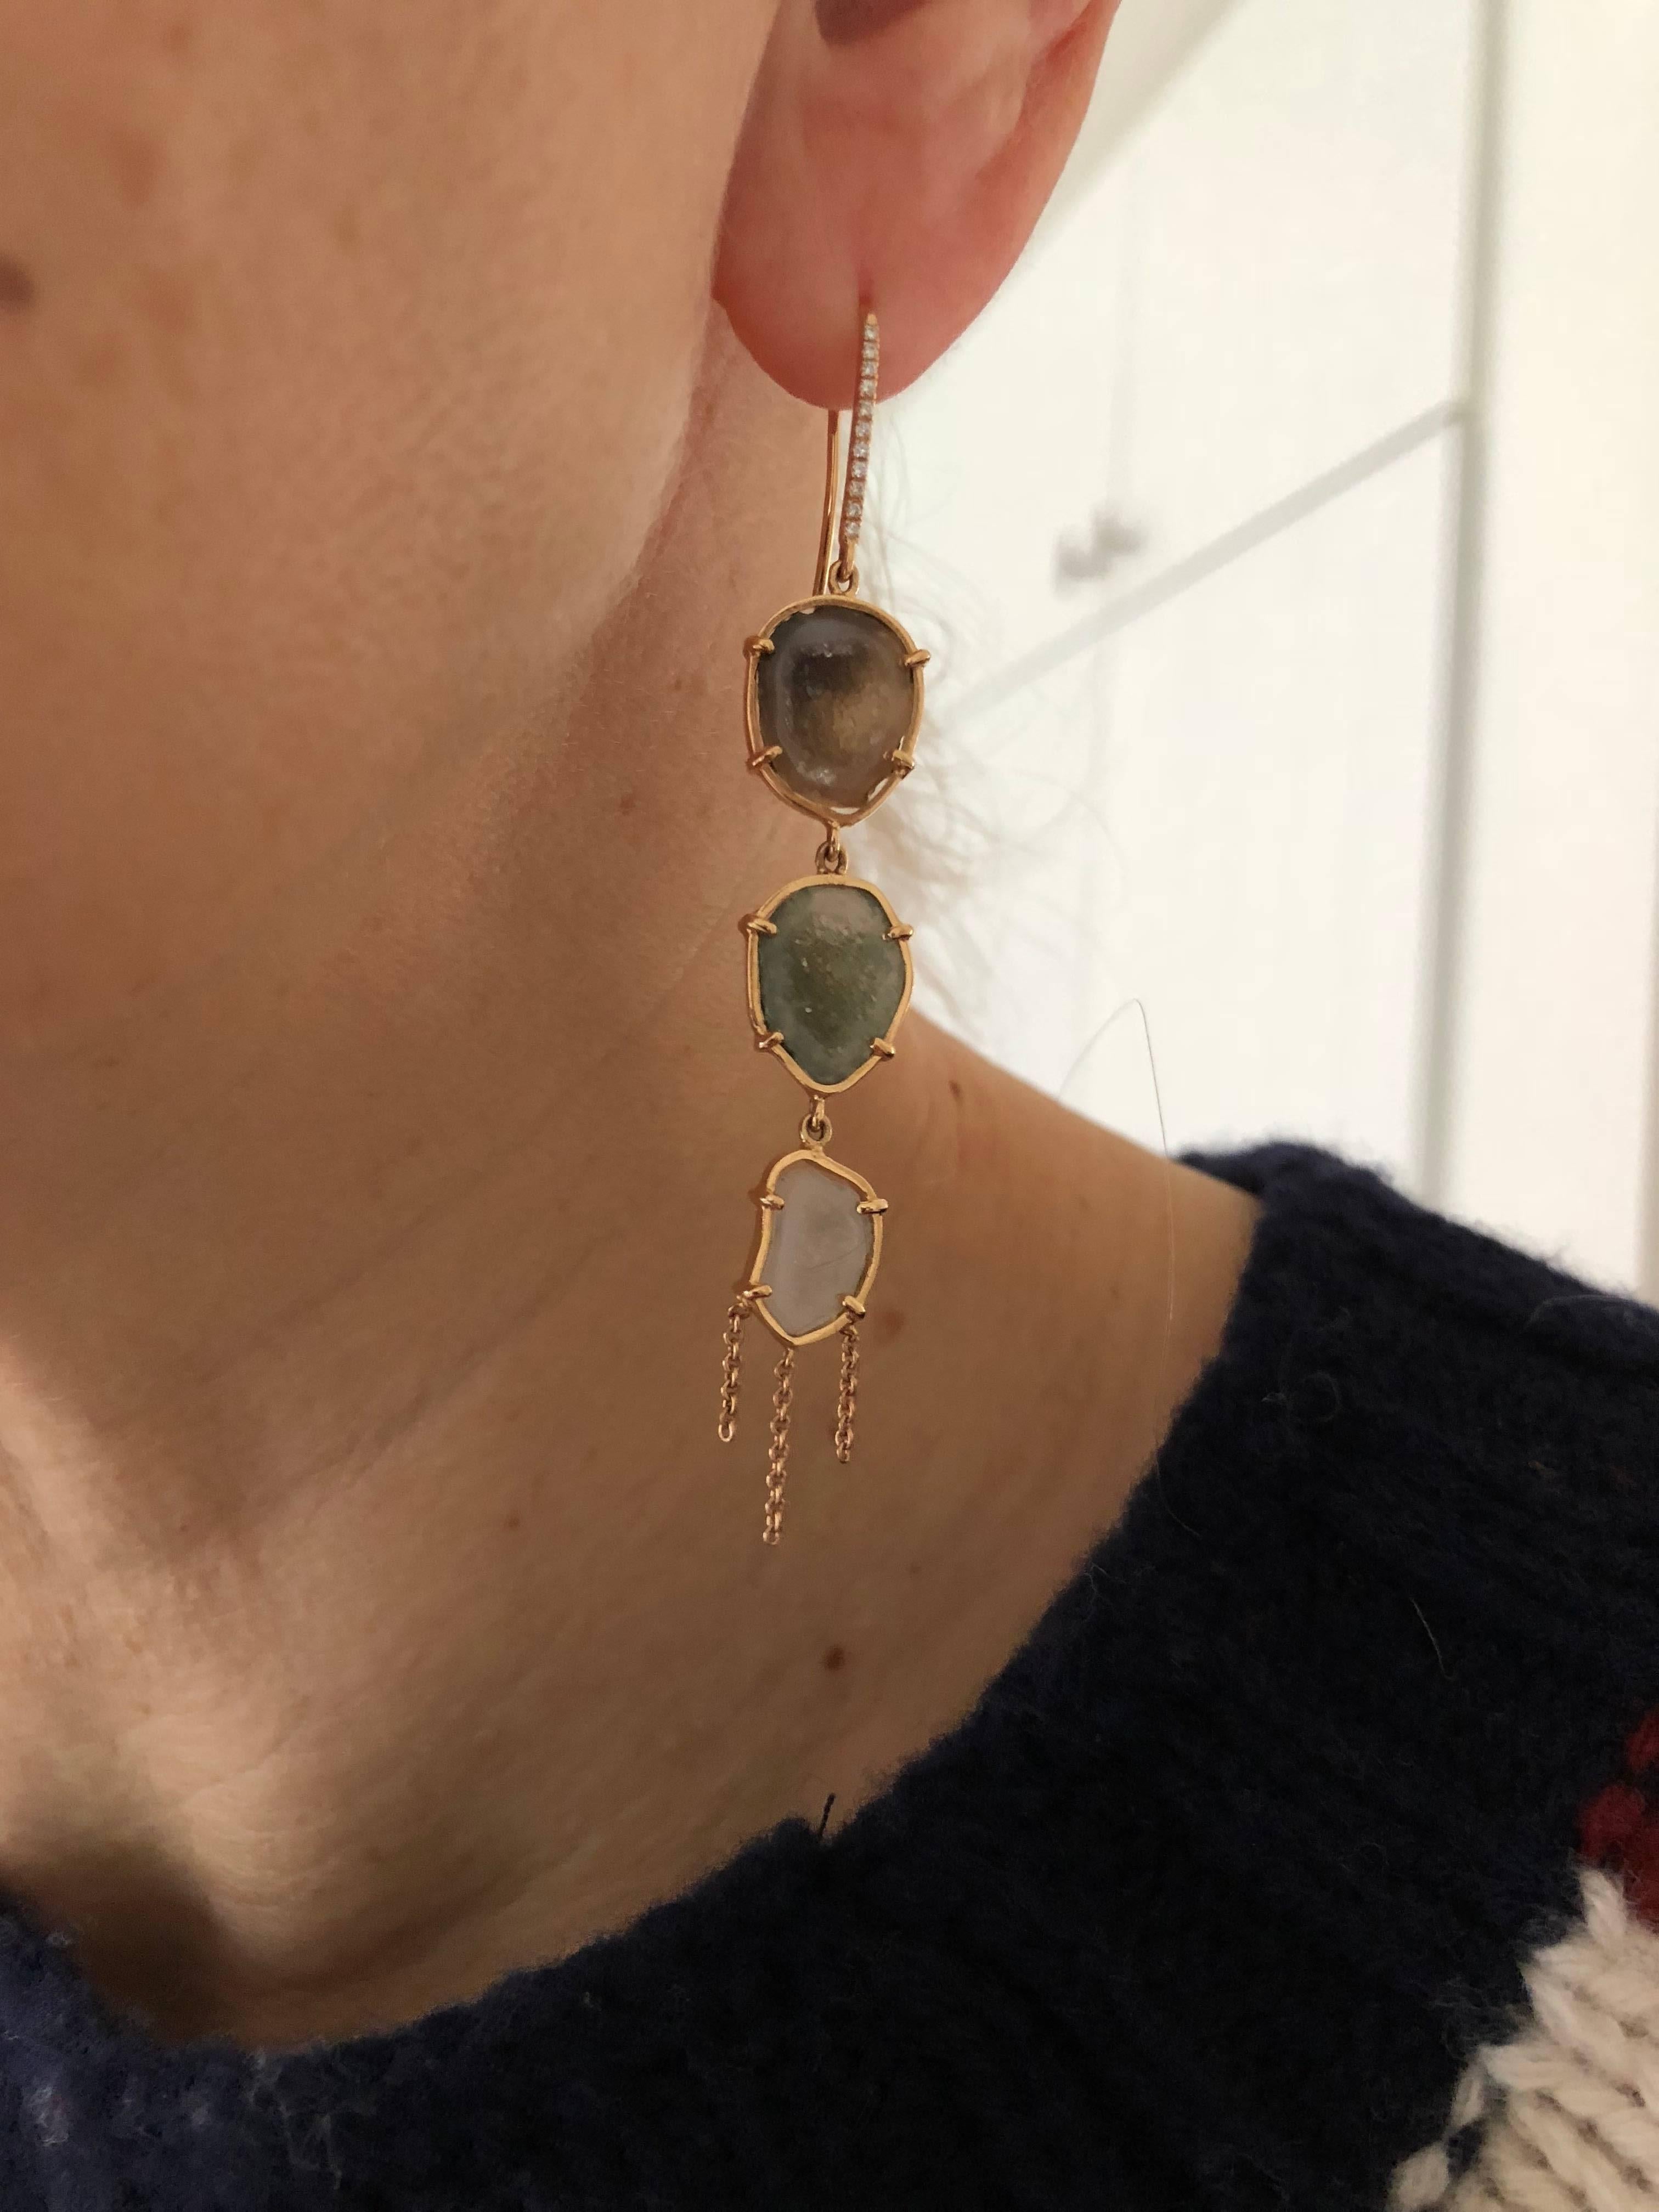 Earrings like a waterfall...
These beauties are set with 18 k rose gold and pastel colored agate geodes.
With little Gvs diamonds ont he hook, they will complete your outfit, day or nights.
